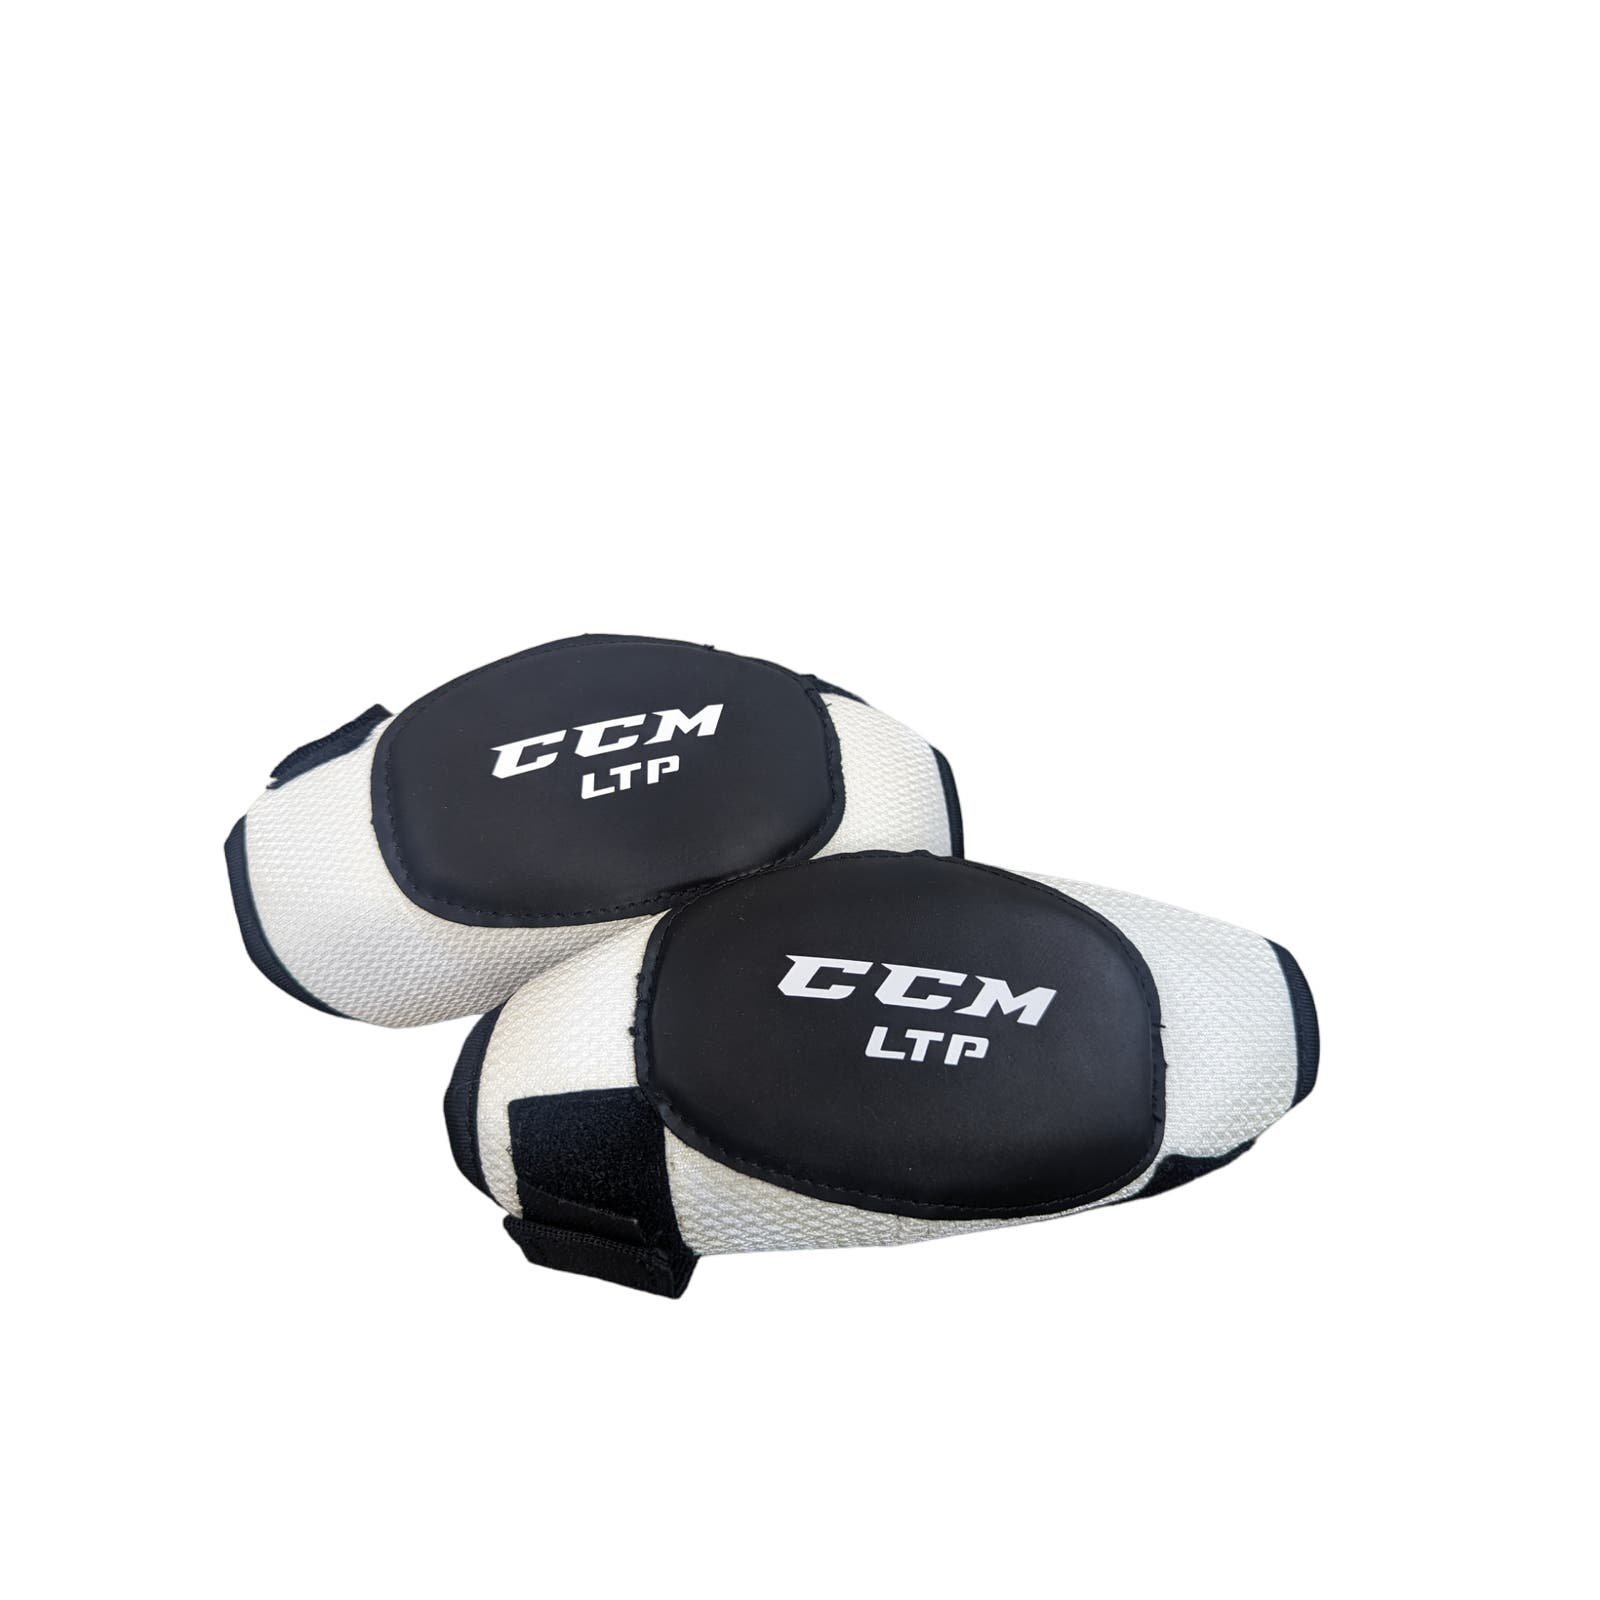 CCM LTP Hockey Elbow Pads Size Youth Small 7837DVi11